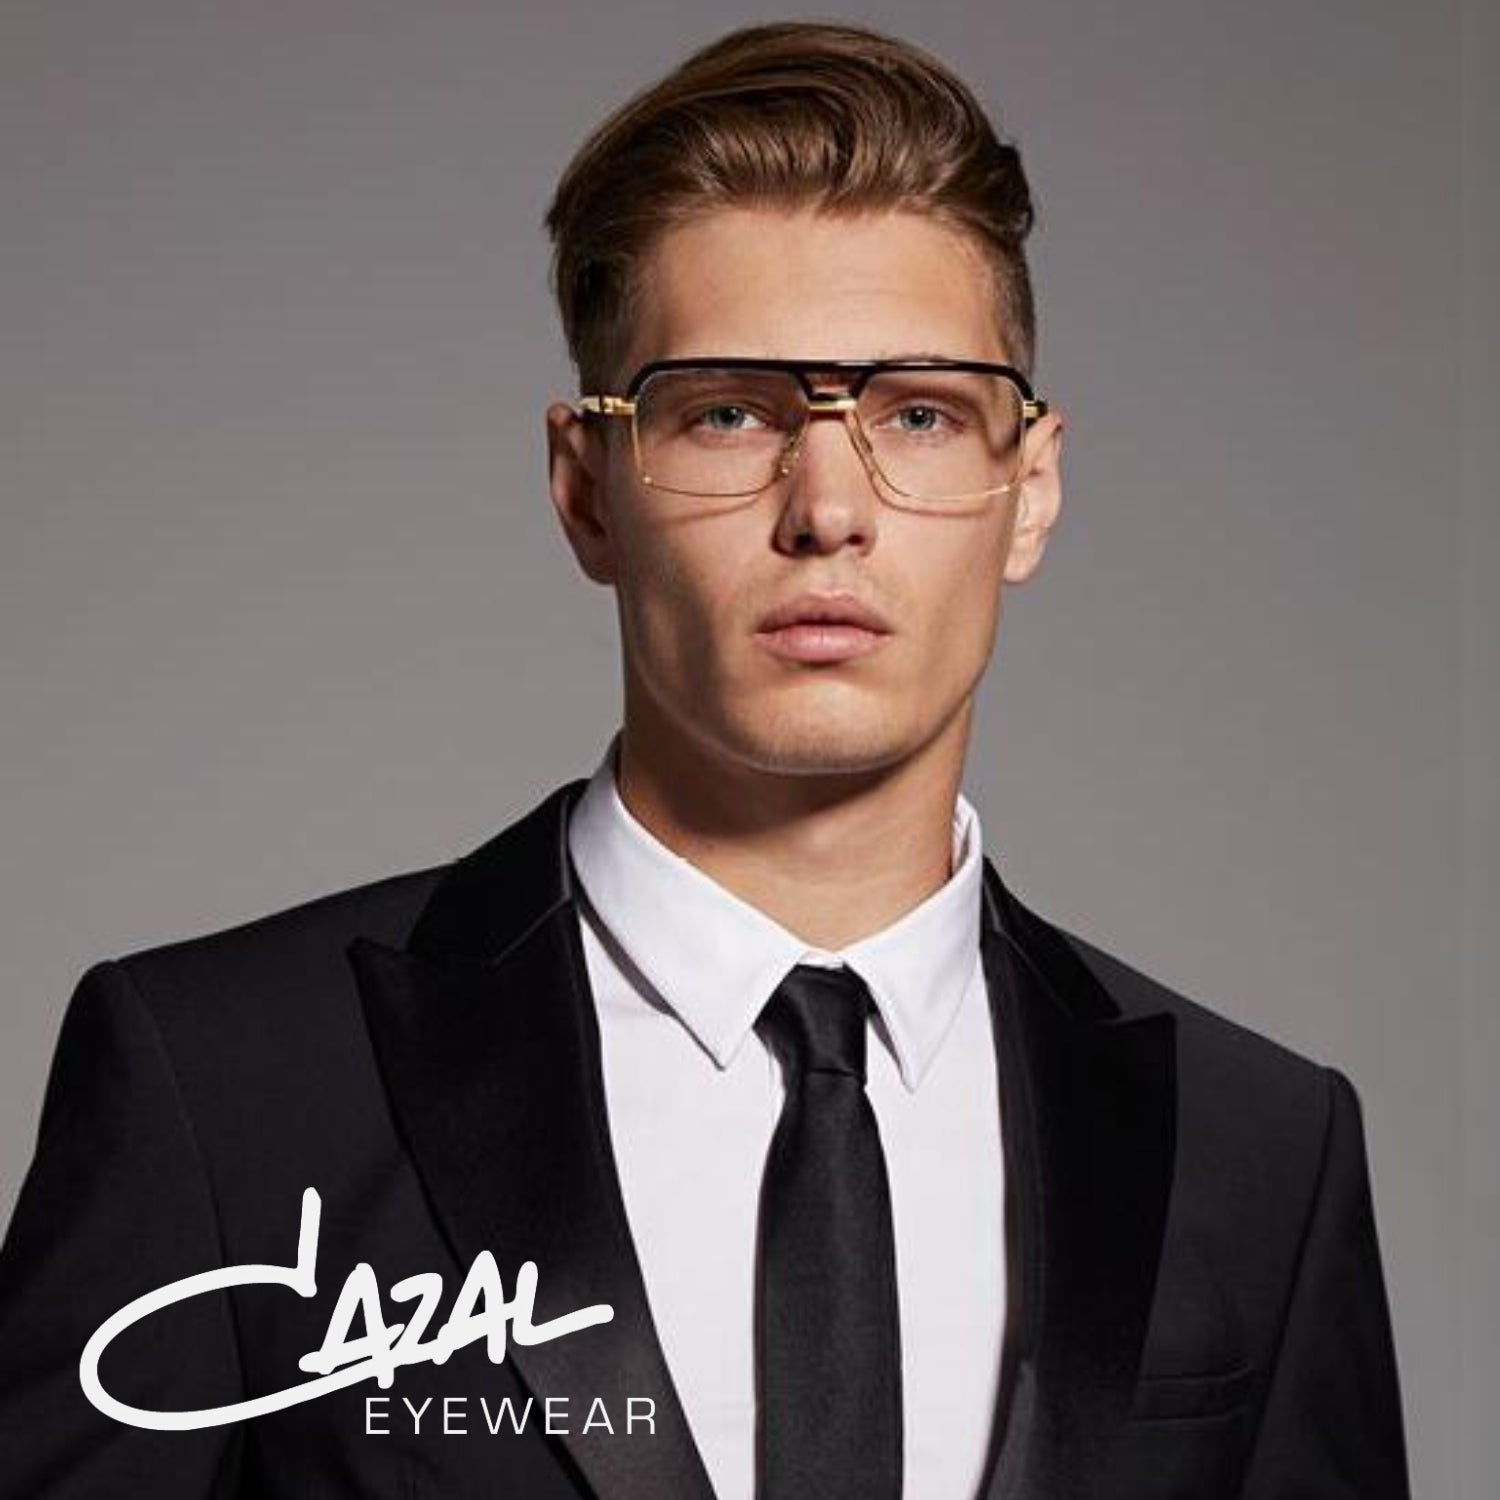 "Optorium: Cazal eyewear sunglasses for men and women. Explore our stylish opticals collection"